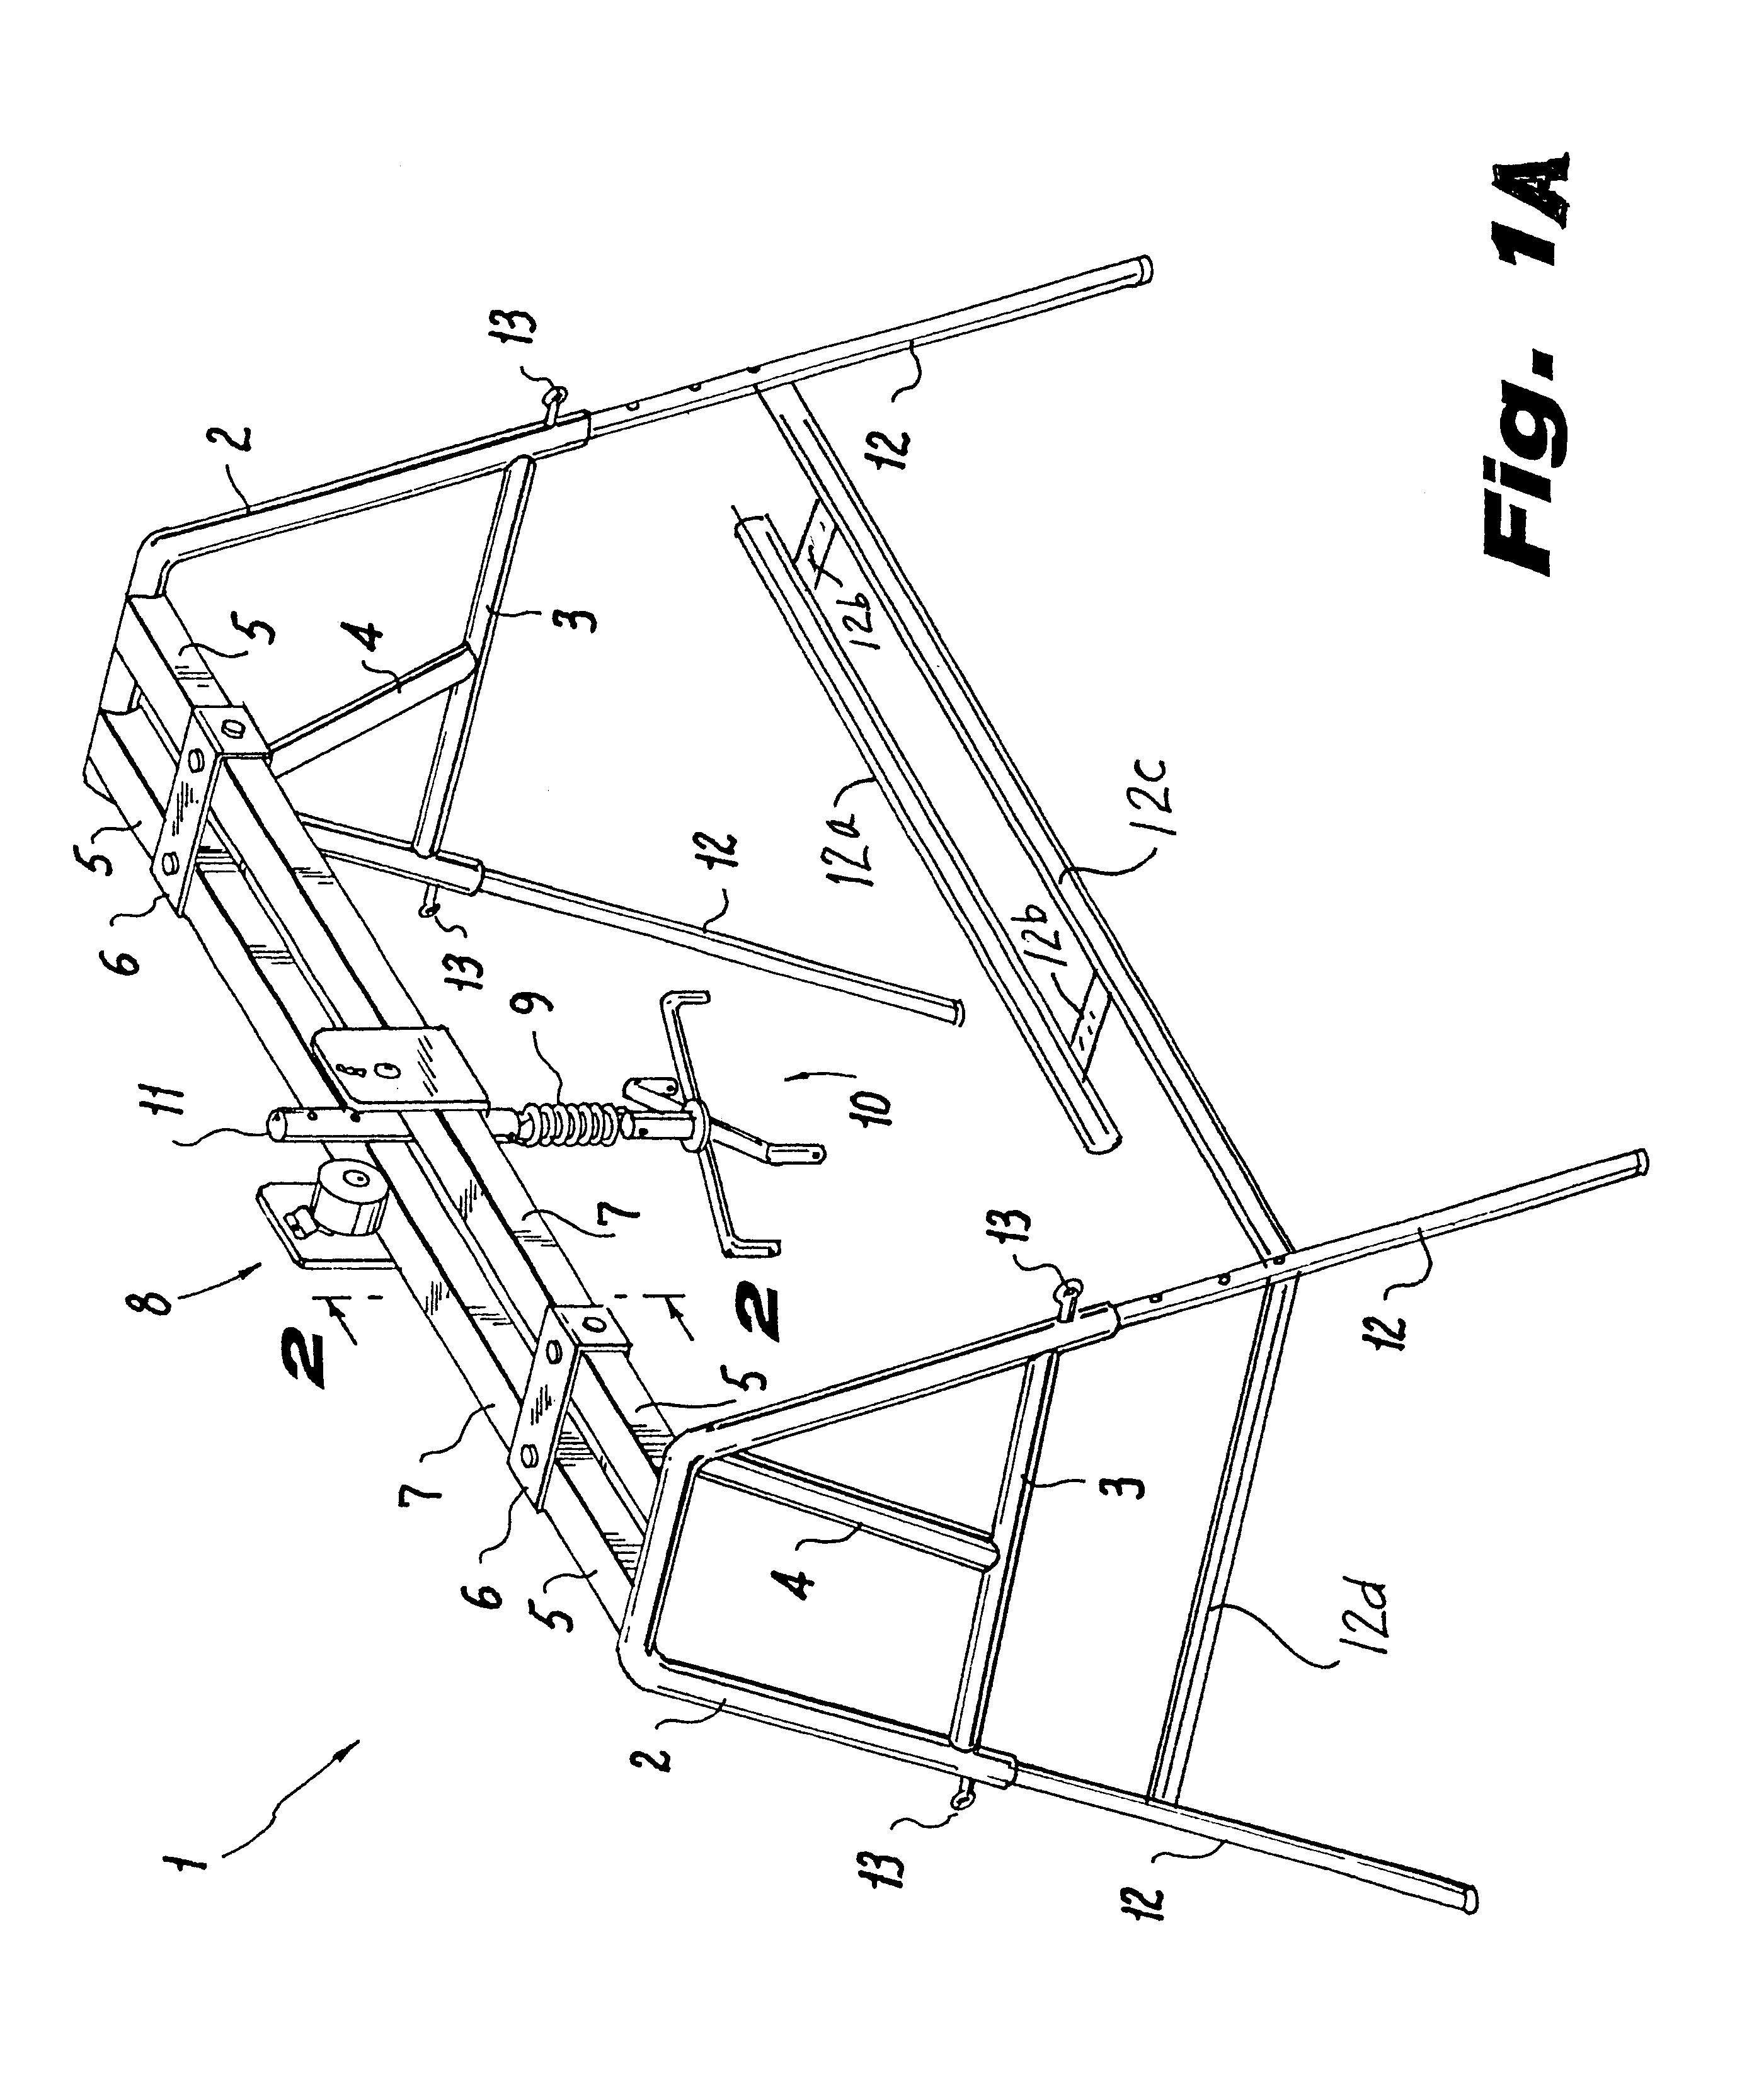 Method and apparatus to exercise developmentally delayed, physically and/or neurologically impaired persons